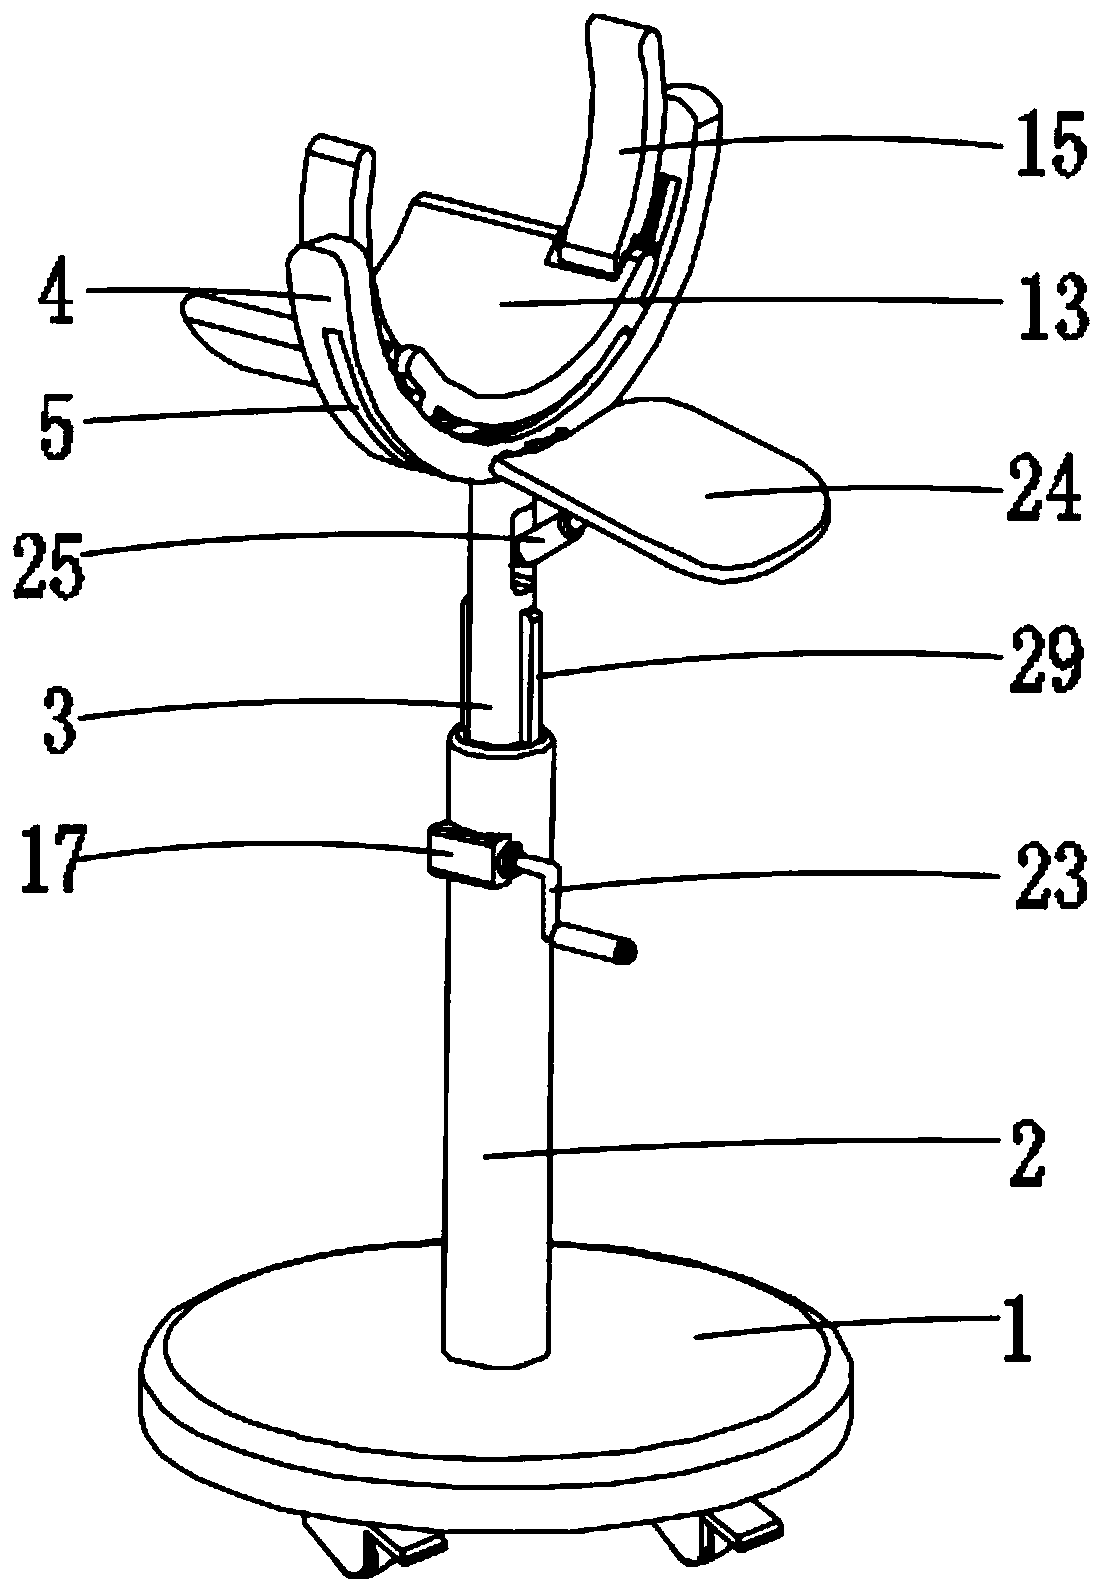 Head supporting and positioning device for neurosurgery